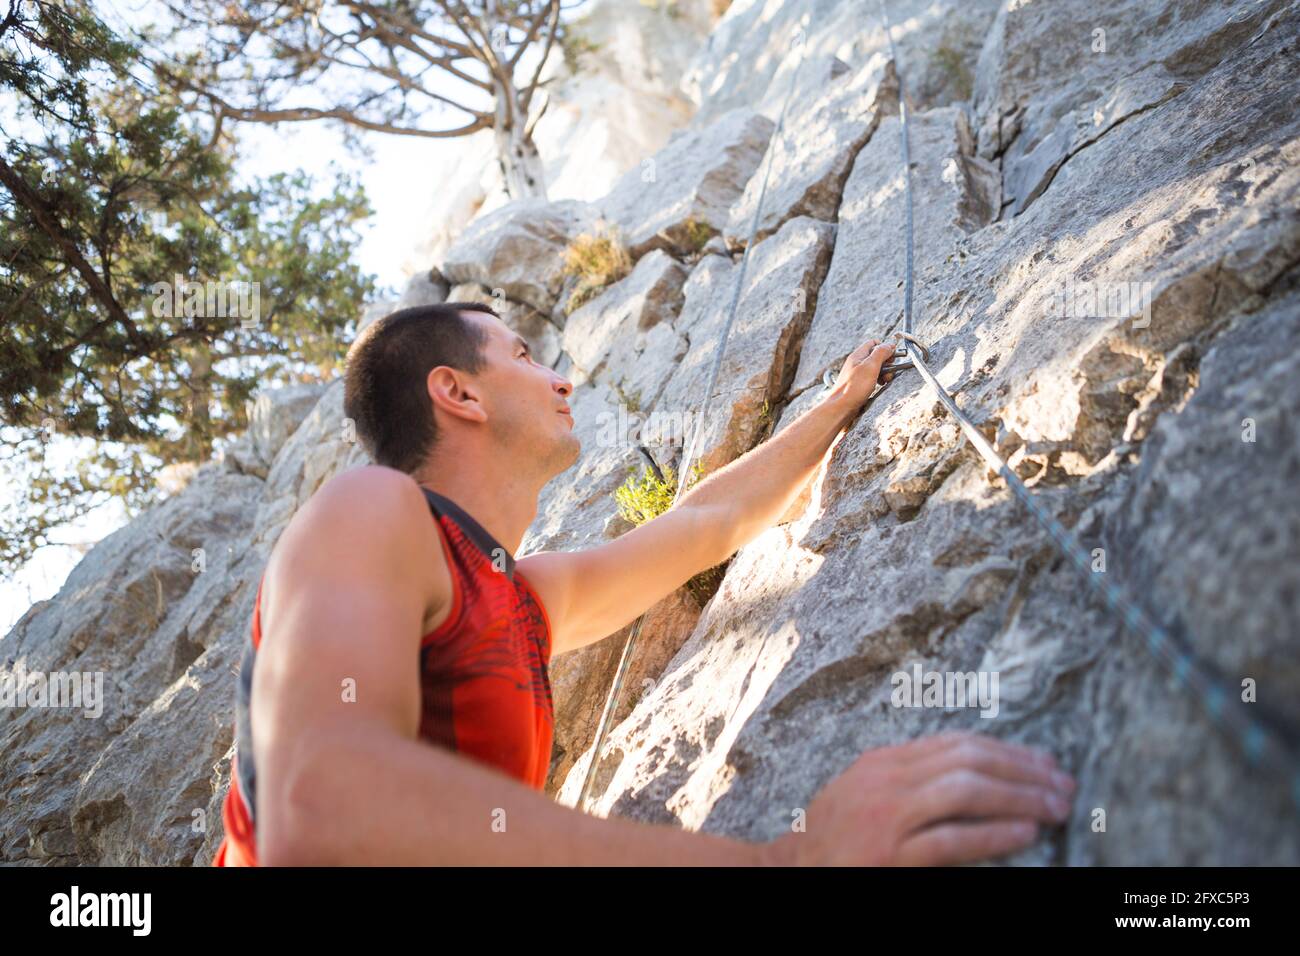 Skaldet Goodwill mørkere Climber in red t-shirt climbs a gray rock. A strong hand grabbed the lead,  selective focus. Strength and endurance, climbing equipment: rope, harness  Stock Photo - Alamy